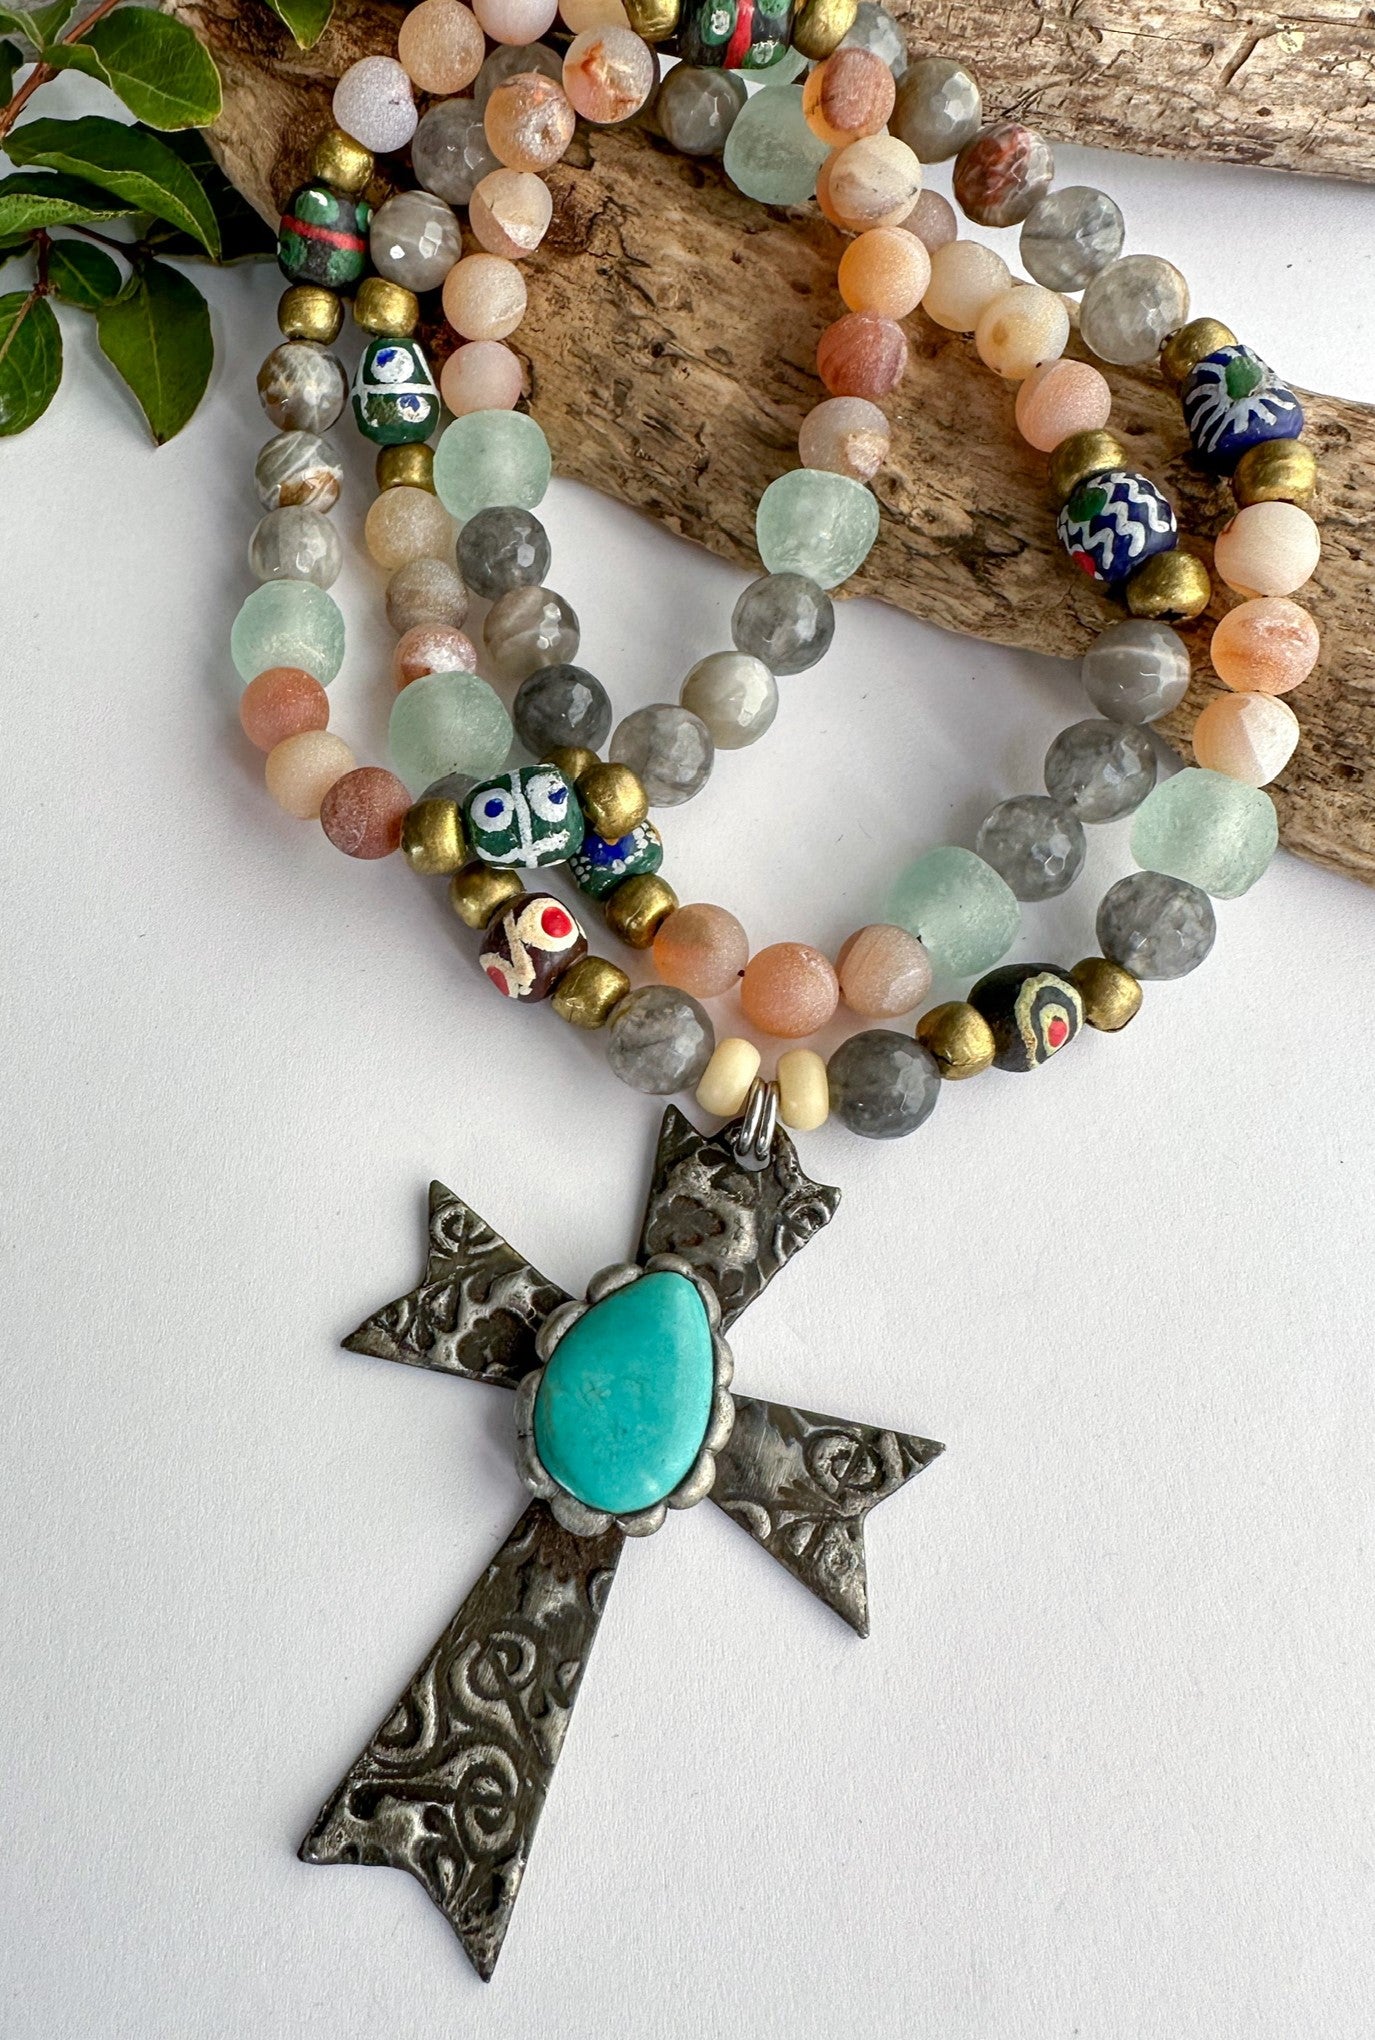 The Scroll Turquoise Cross Necklace in Peach Mix - SpiritedBoutiques Boho Hippie Boutique Style Necklace, Spirit Lala Vintage Coin